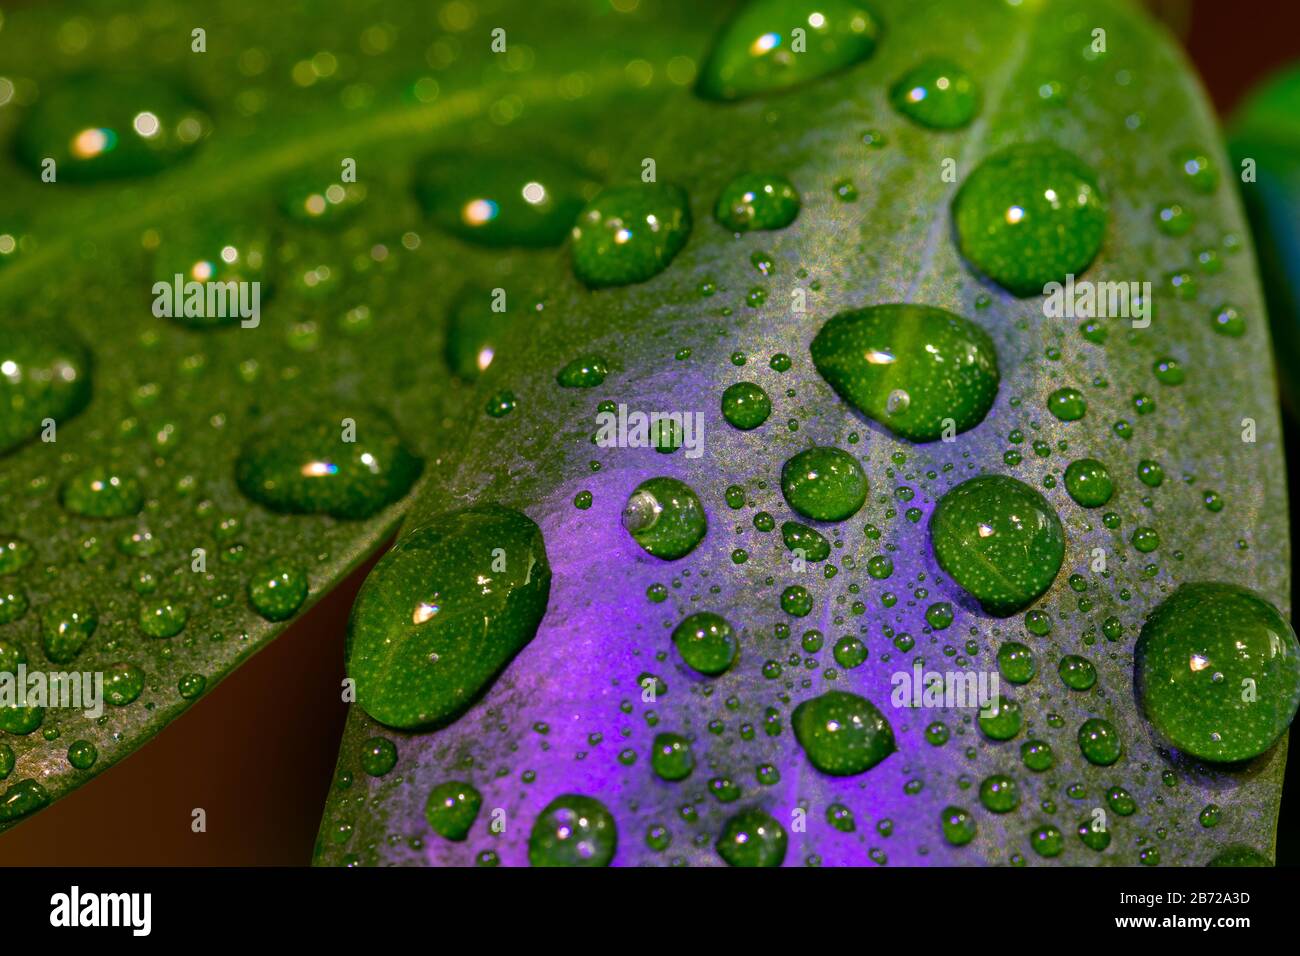 Macro photo of a house plant with water droplets and colored lights reflecting on the leaves Stock Photo